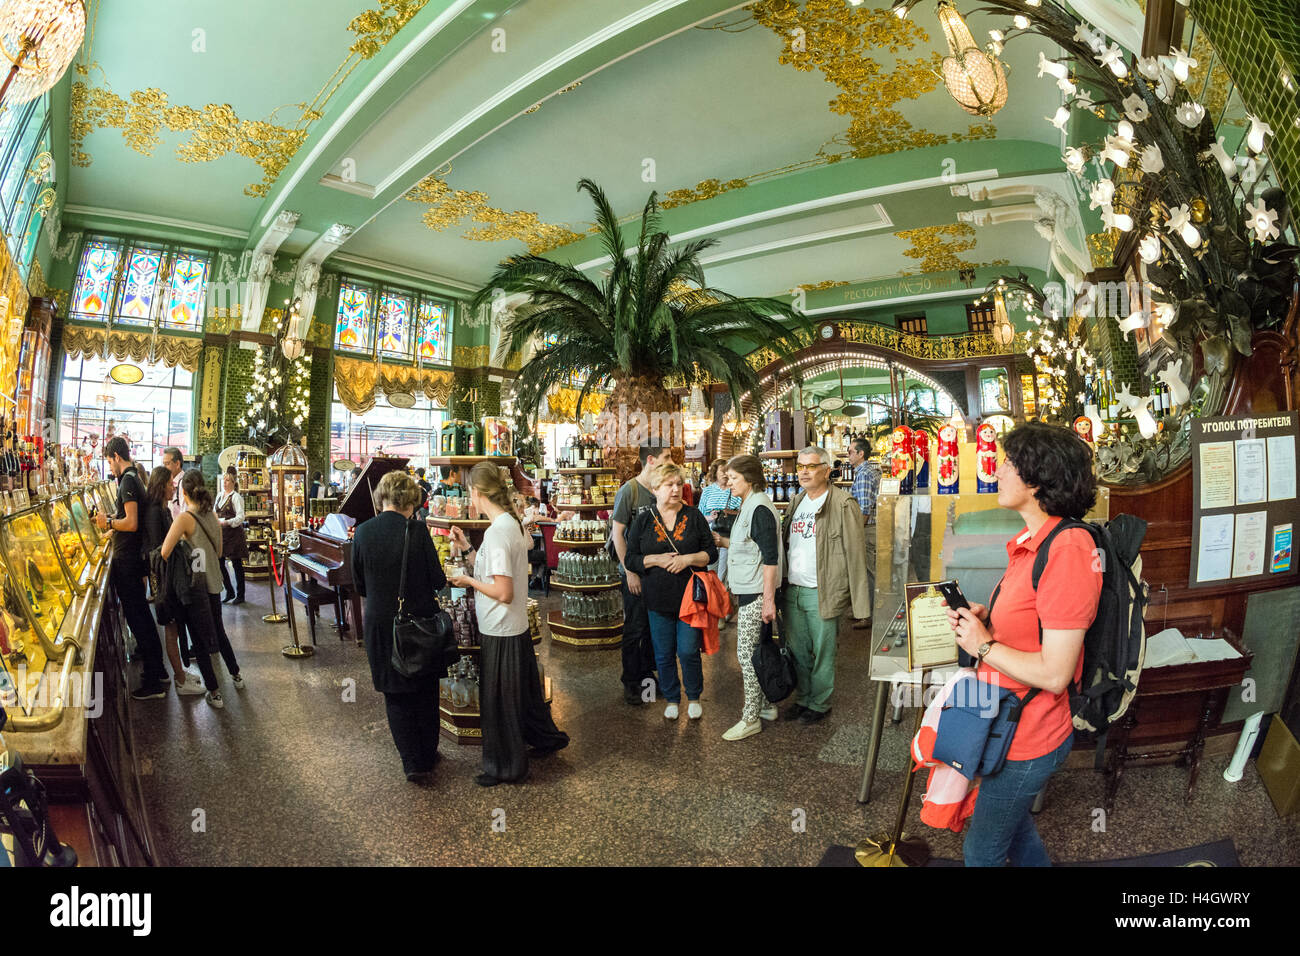 ST. PETERSBURG, RUSSIA - JULY 14, 2016: Elisseeff Emporium in St. Petersburg is a large retail and entertainment complex, includ Stock Photo